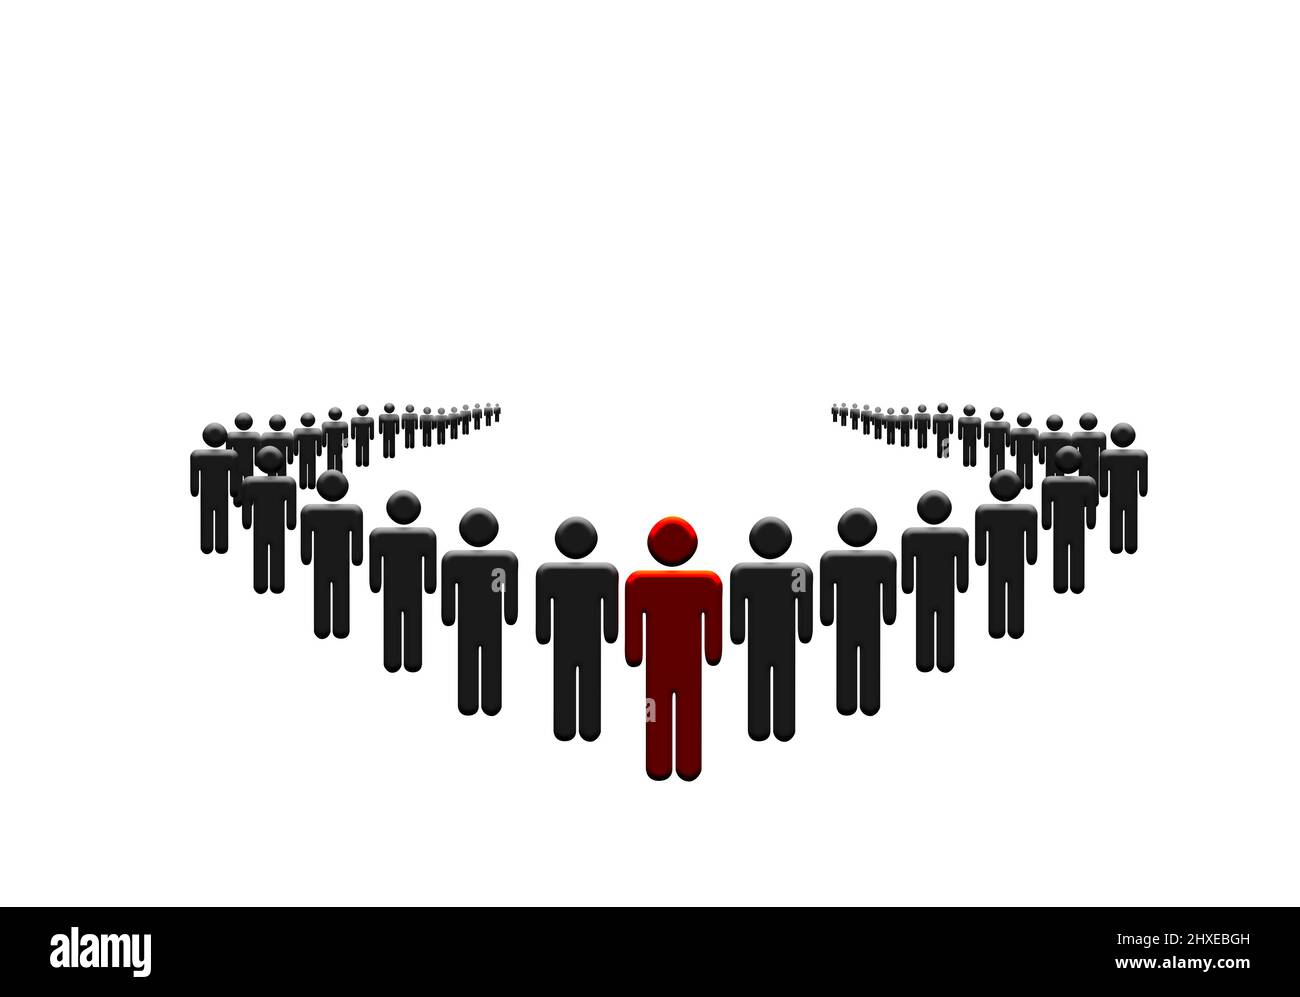 One Man Leads The Crowd Concept. Organized People with Leader Unique Character. Leadership and Businessman Teamwork Stock Photo